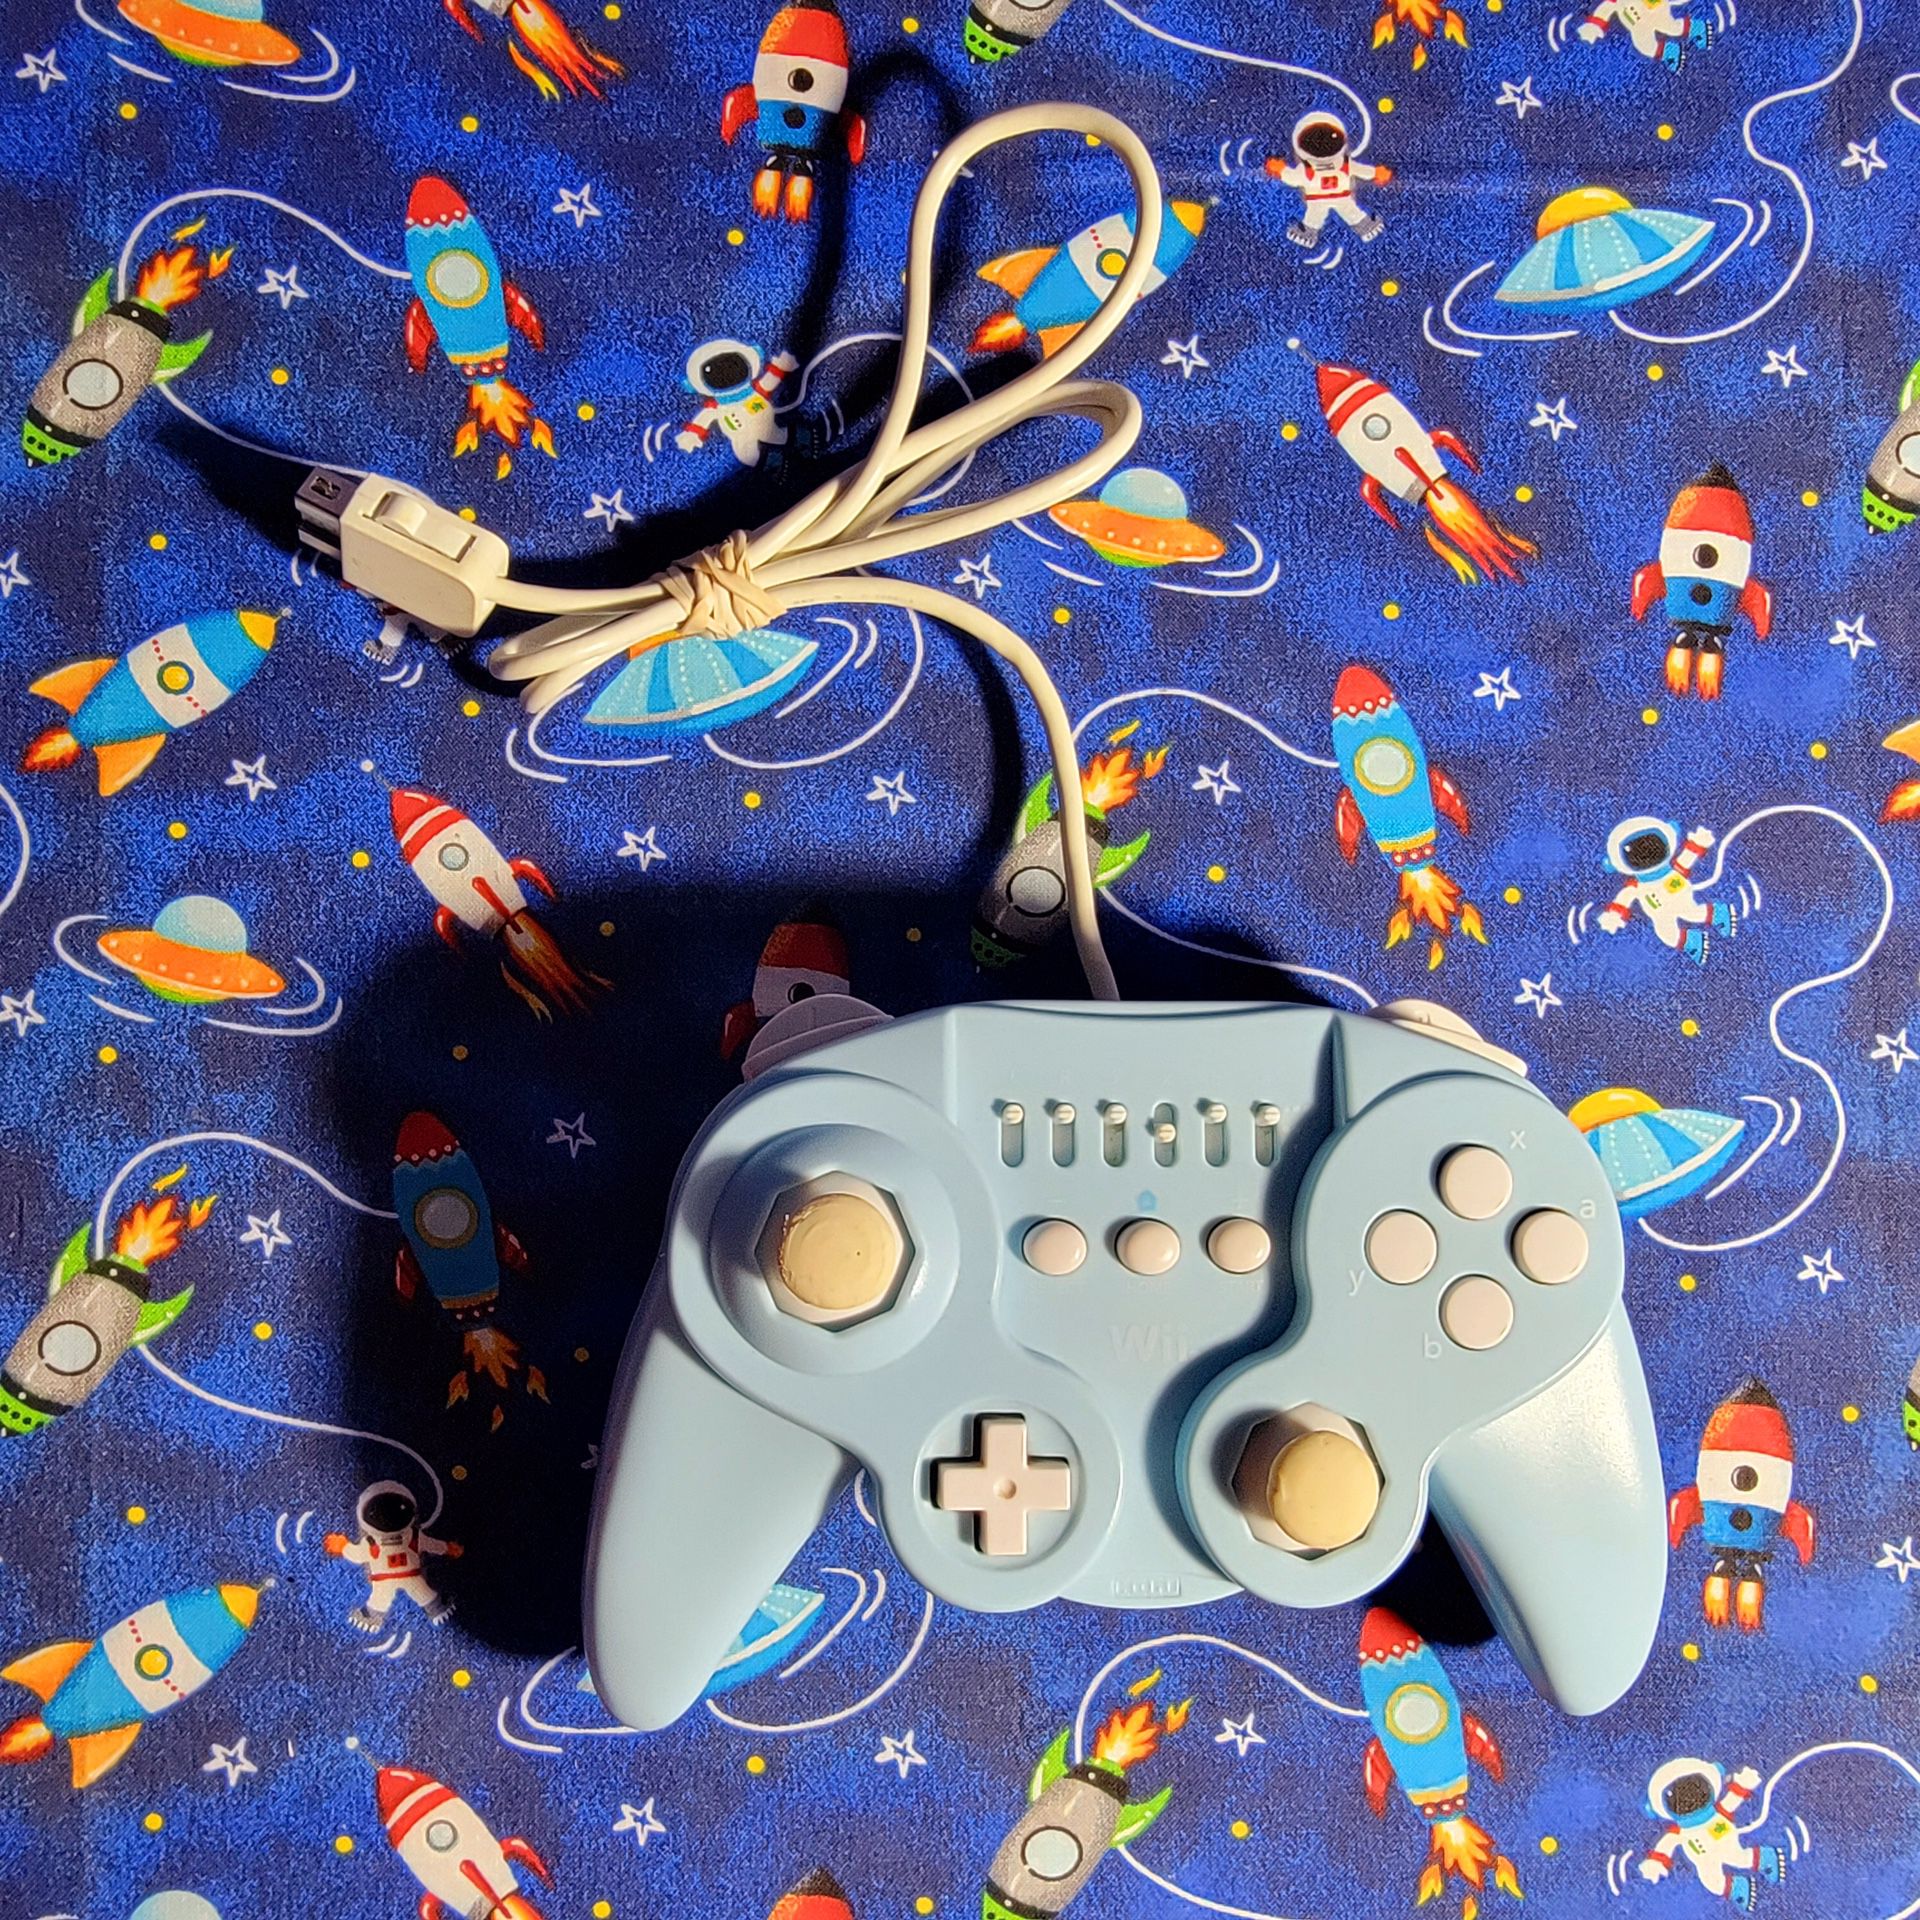 Super Rare Sky Blue Classic Wired Multi-Function Hori Controller For Nintendo Wii & Wii U Backwards Compatible